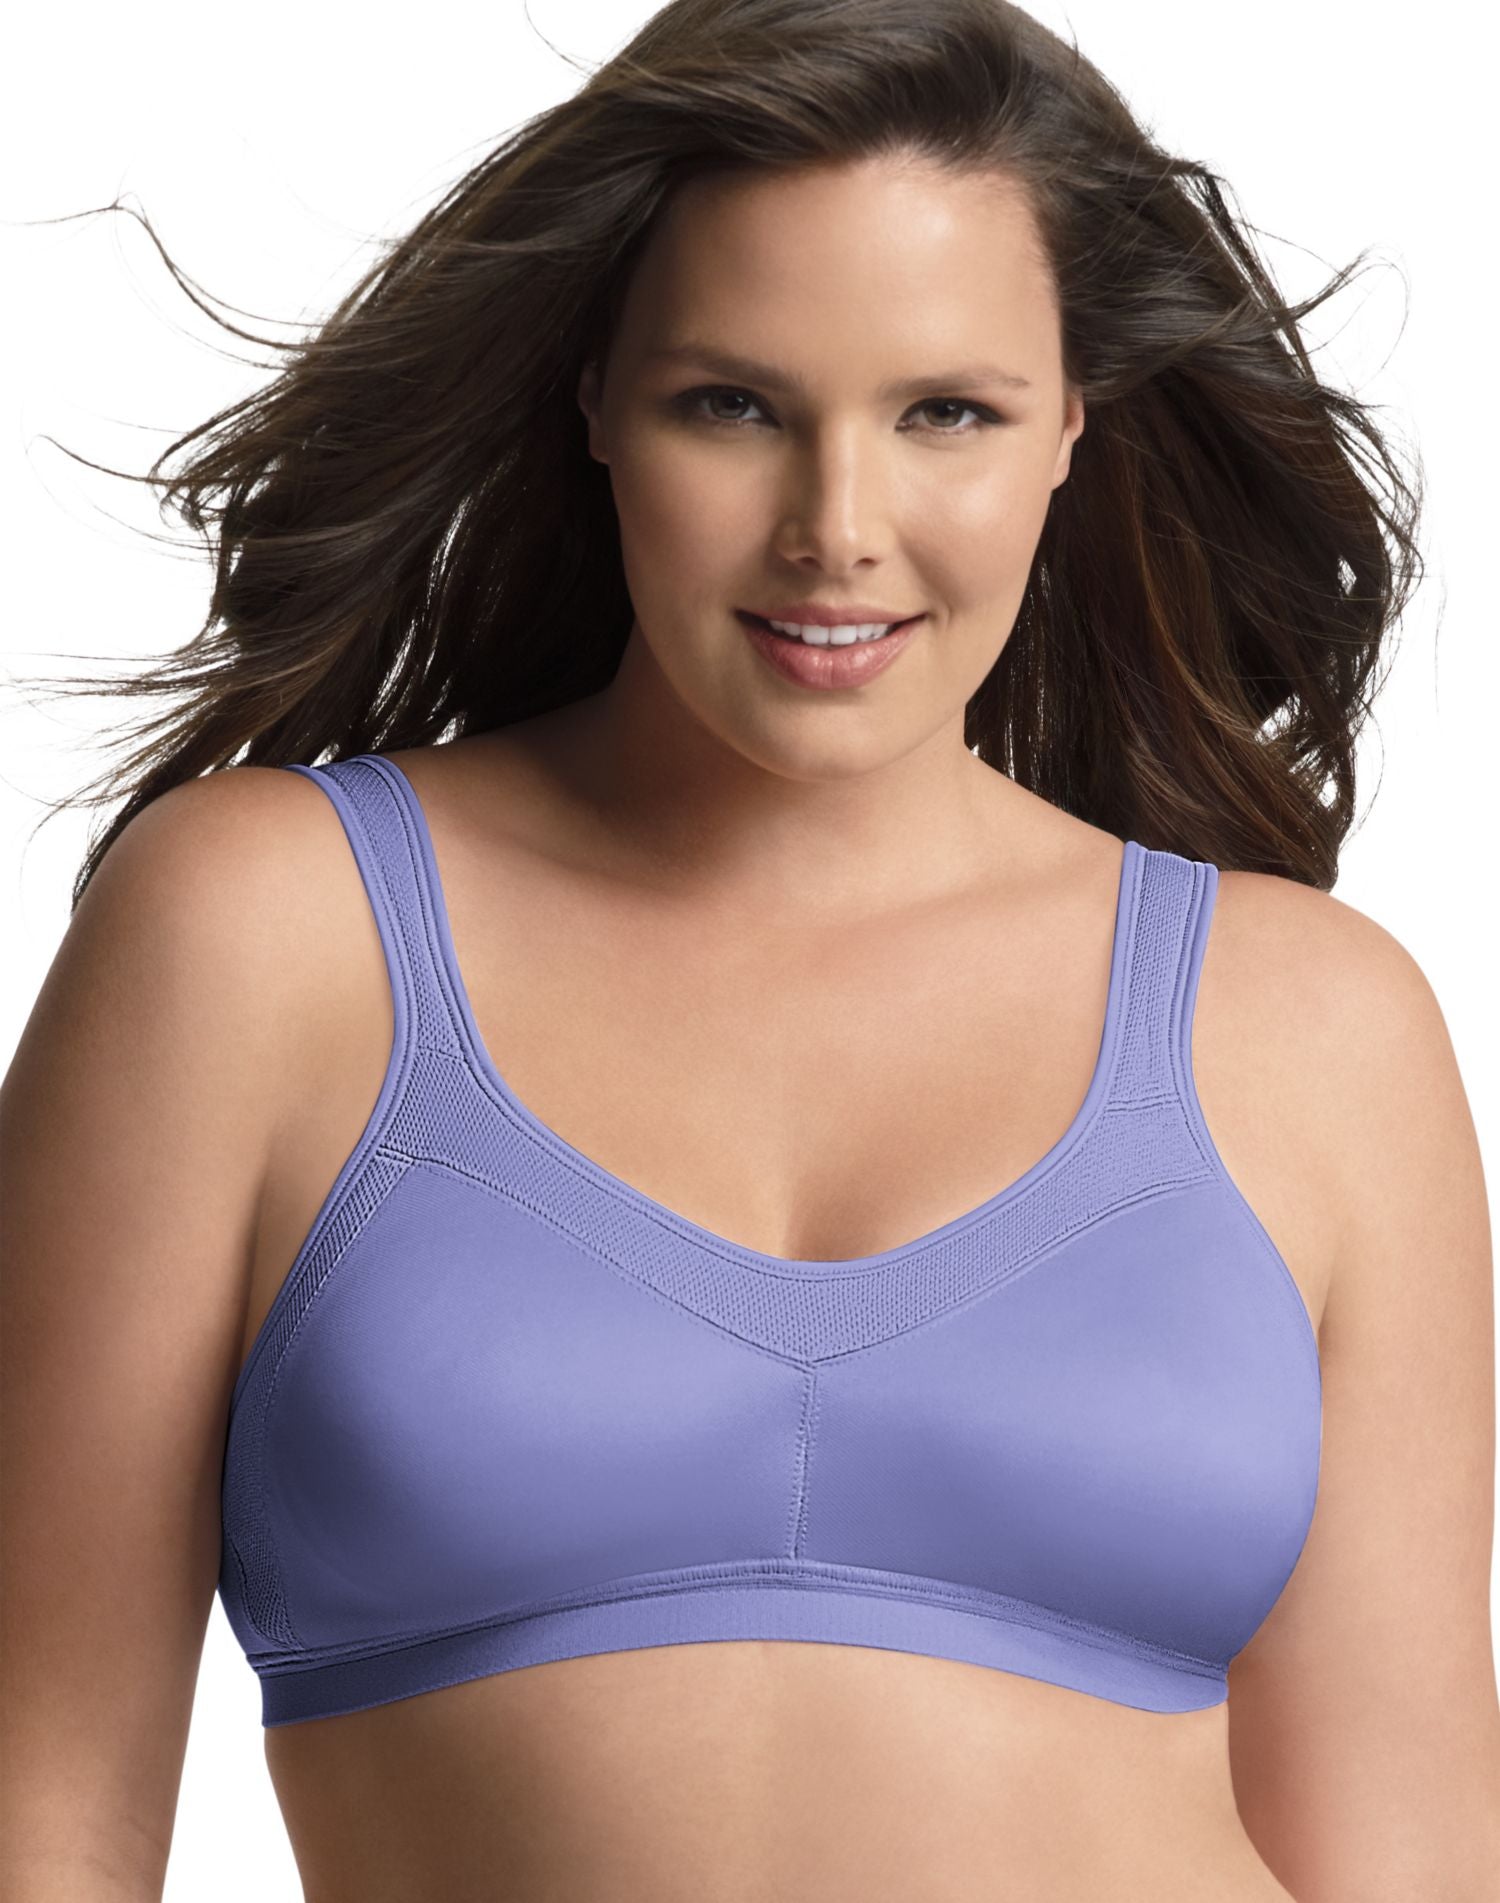 Plus Size Bra with Full Soft Cups and Side Reinforcement for Wide